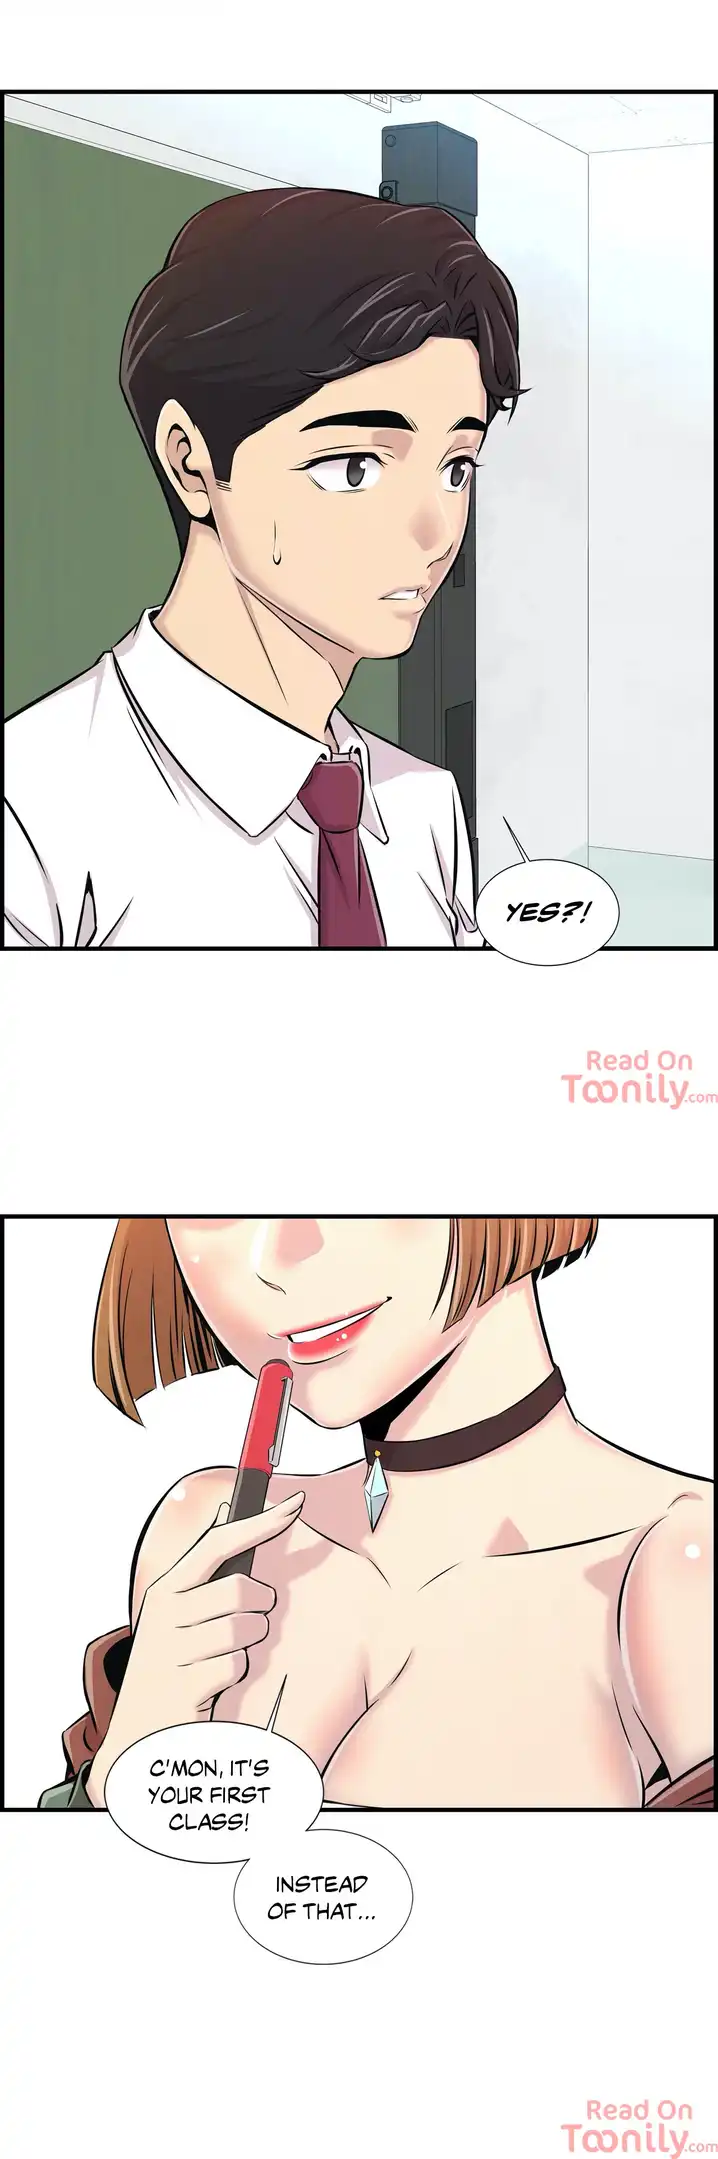 Cram School Scandal - Chapter 2 Page 2